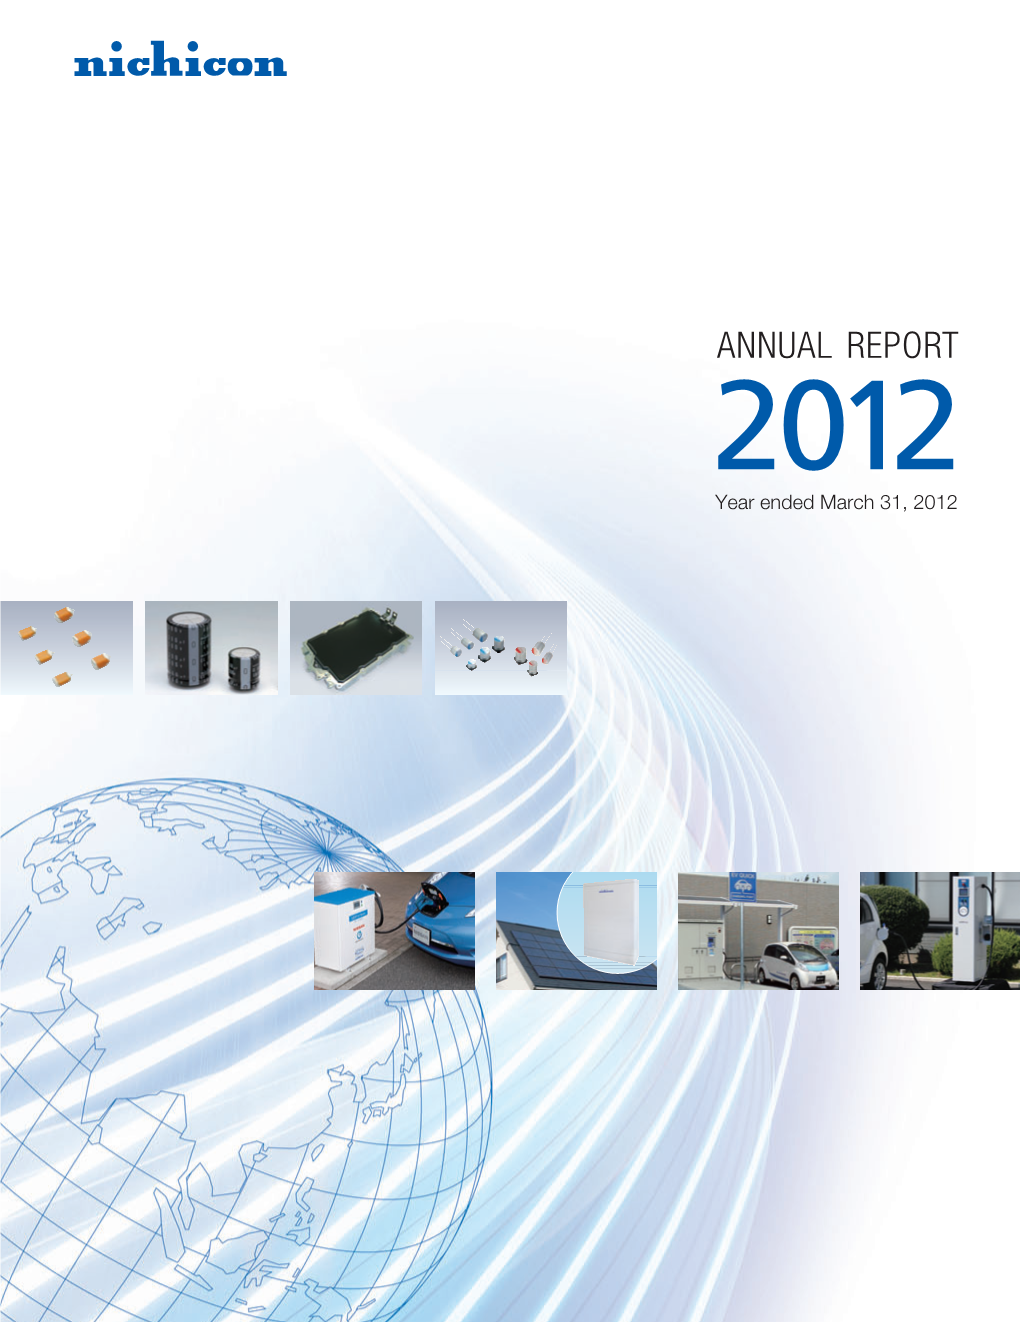 ANNUAL REPORT 2012 Year Ended March 31, 2012 Profile